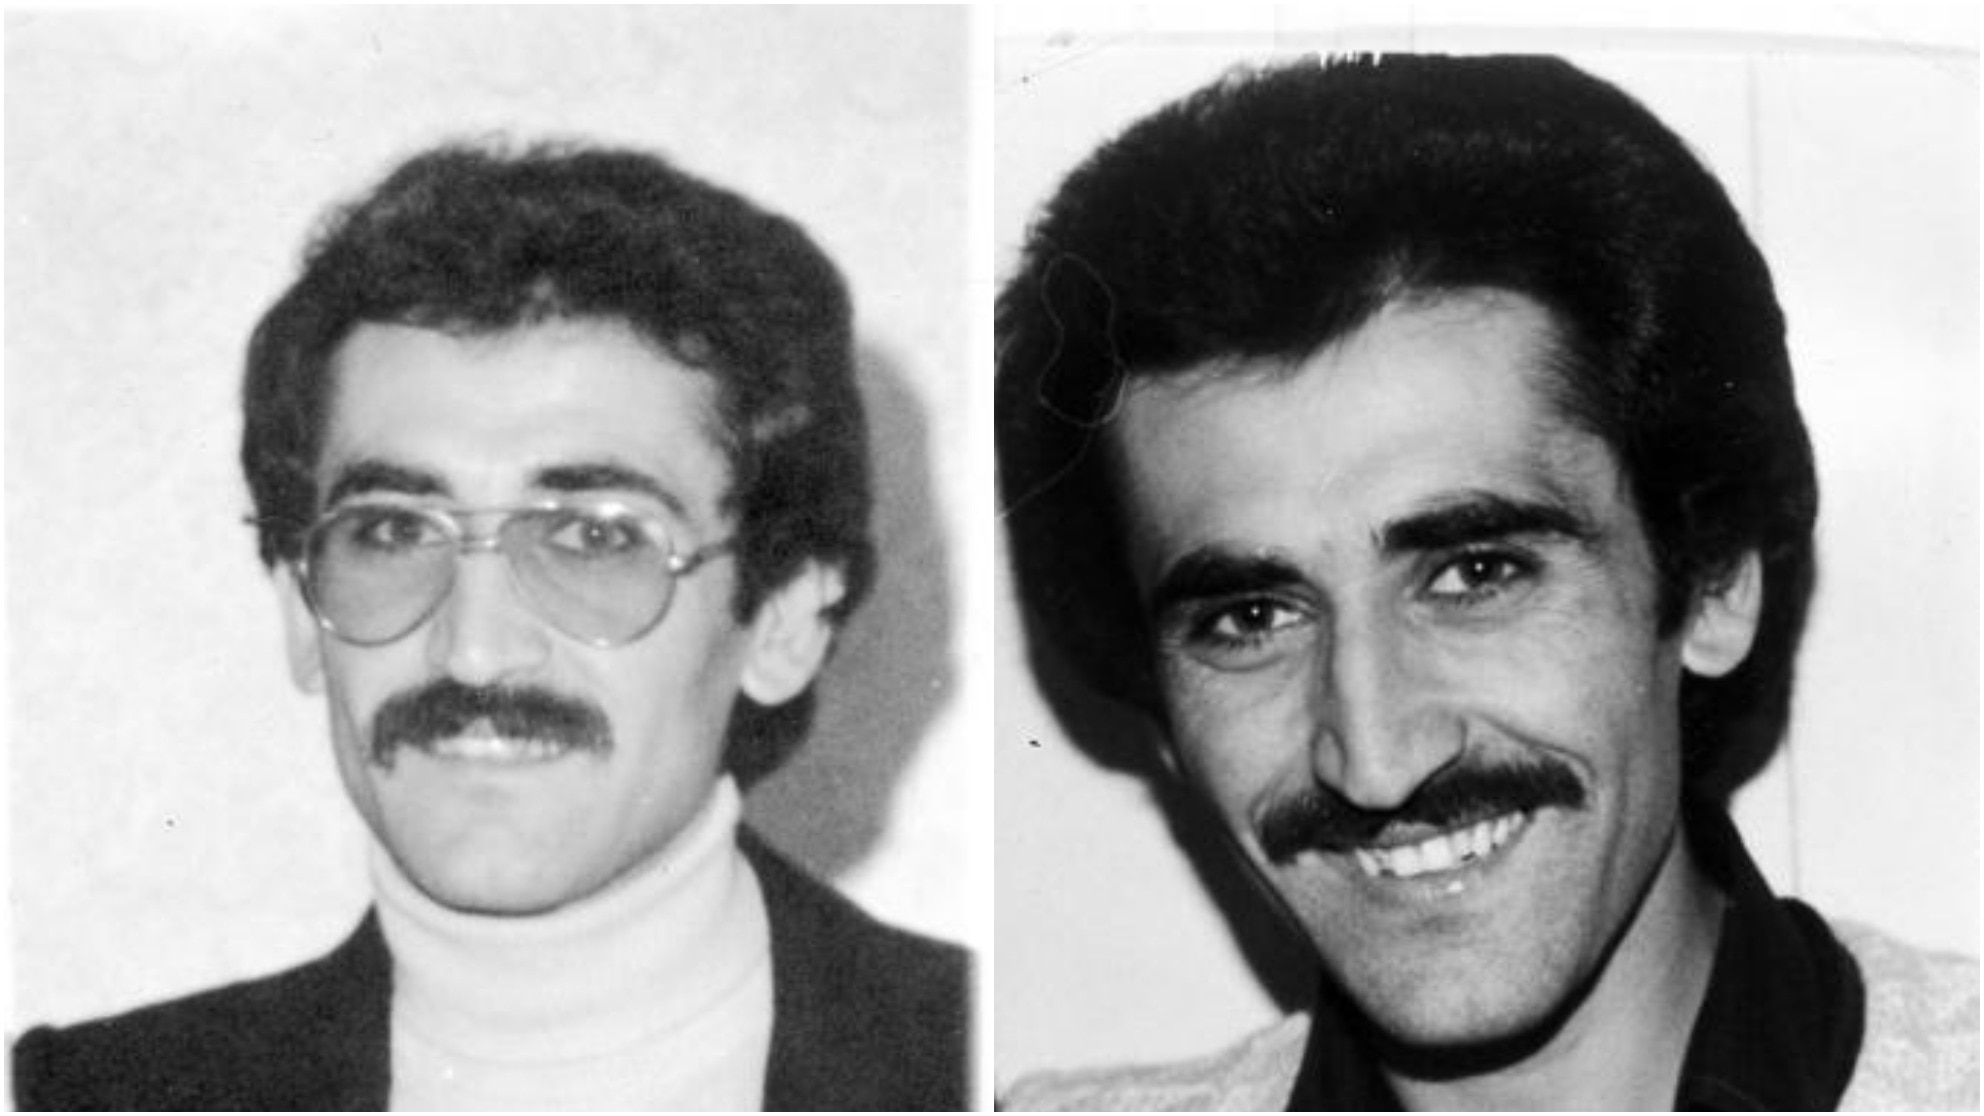 Jamshid Pour-Ostadkar was executed by firing squad in Tehran on 9th December 1984.